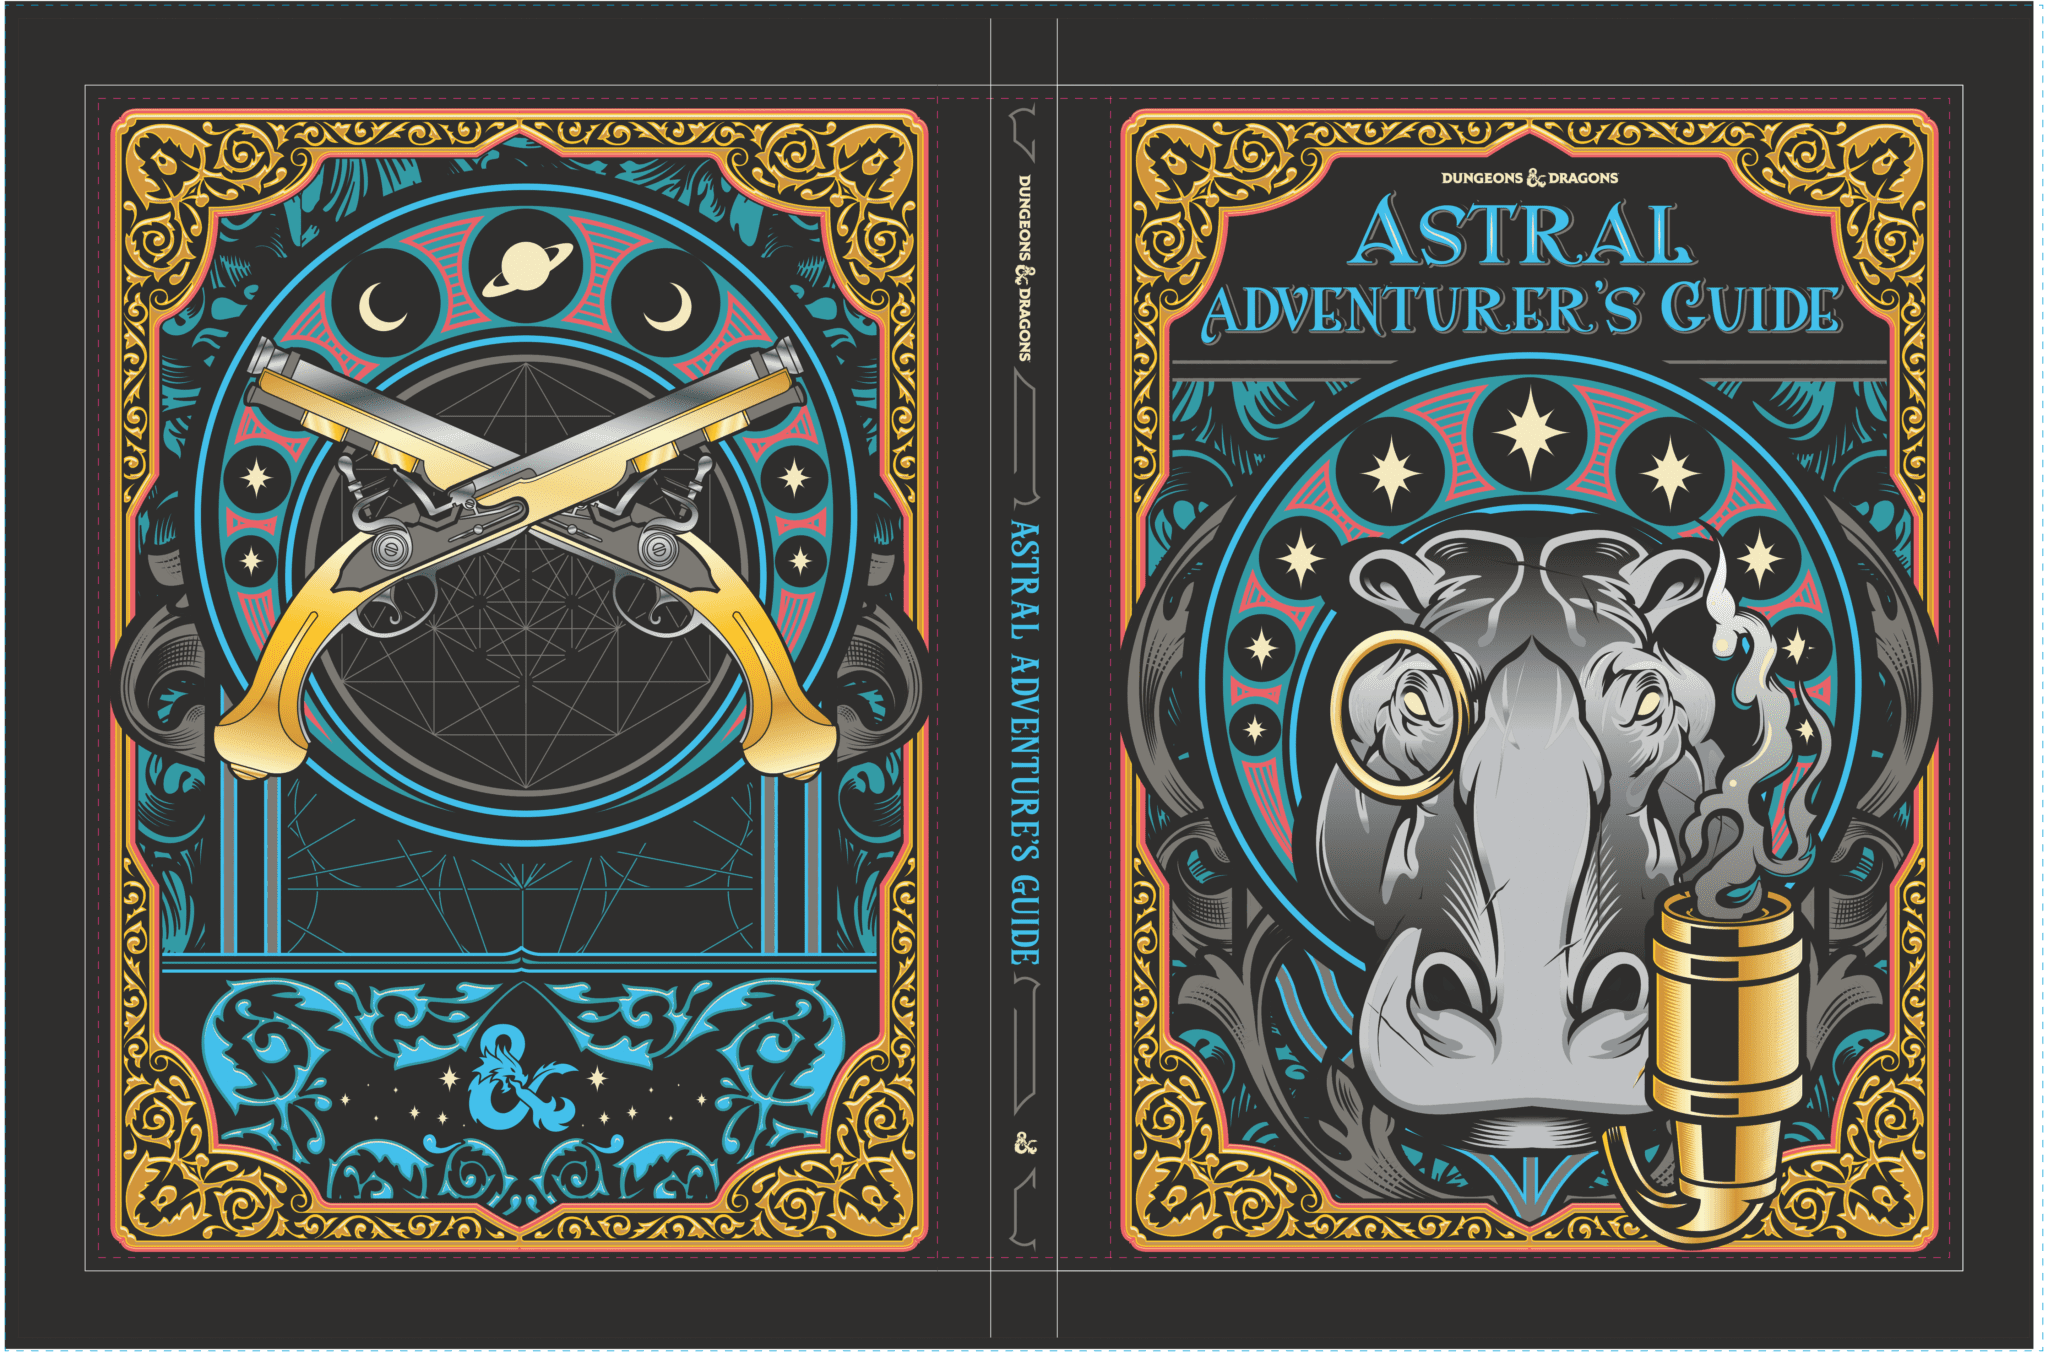 The Astral Adventurer's Guide alt cover by Hydro 74